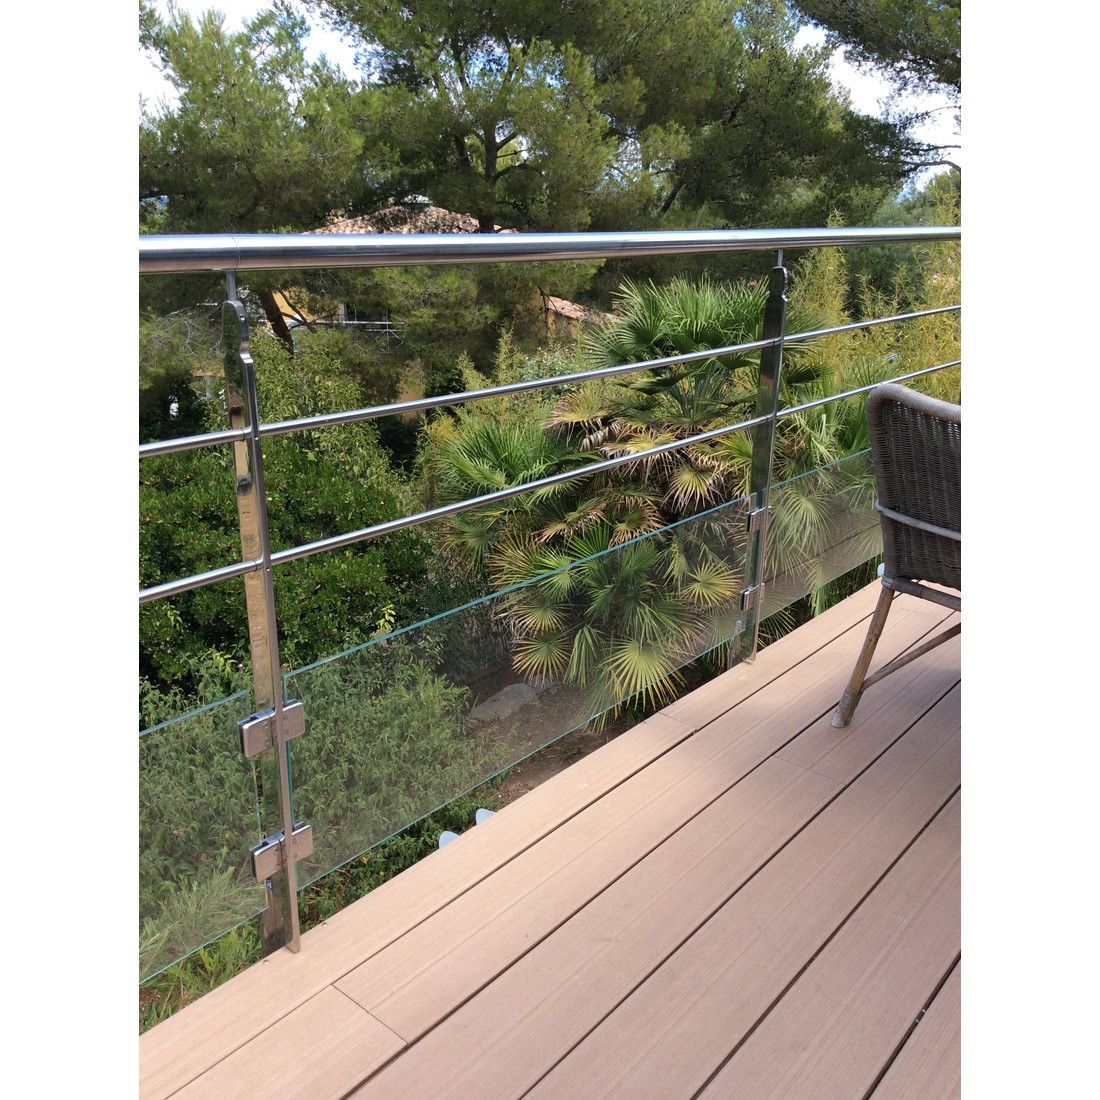 Stainless steel and glass railing - model 301/302